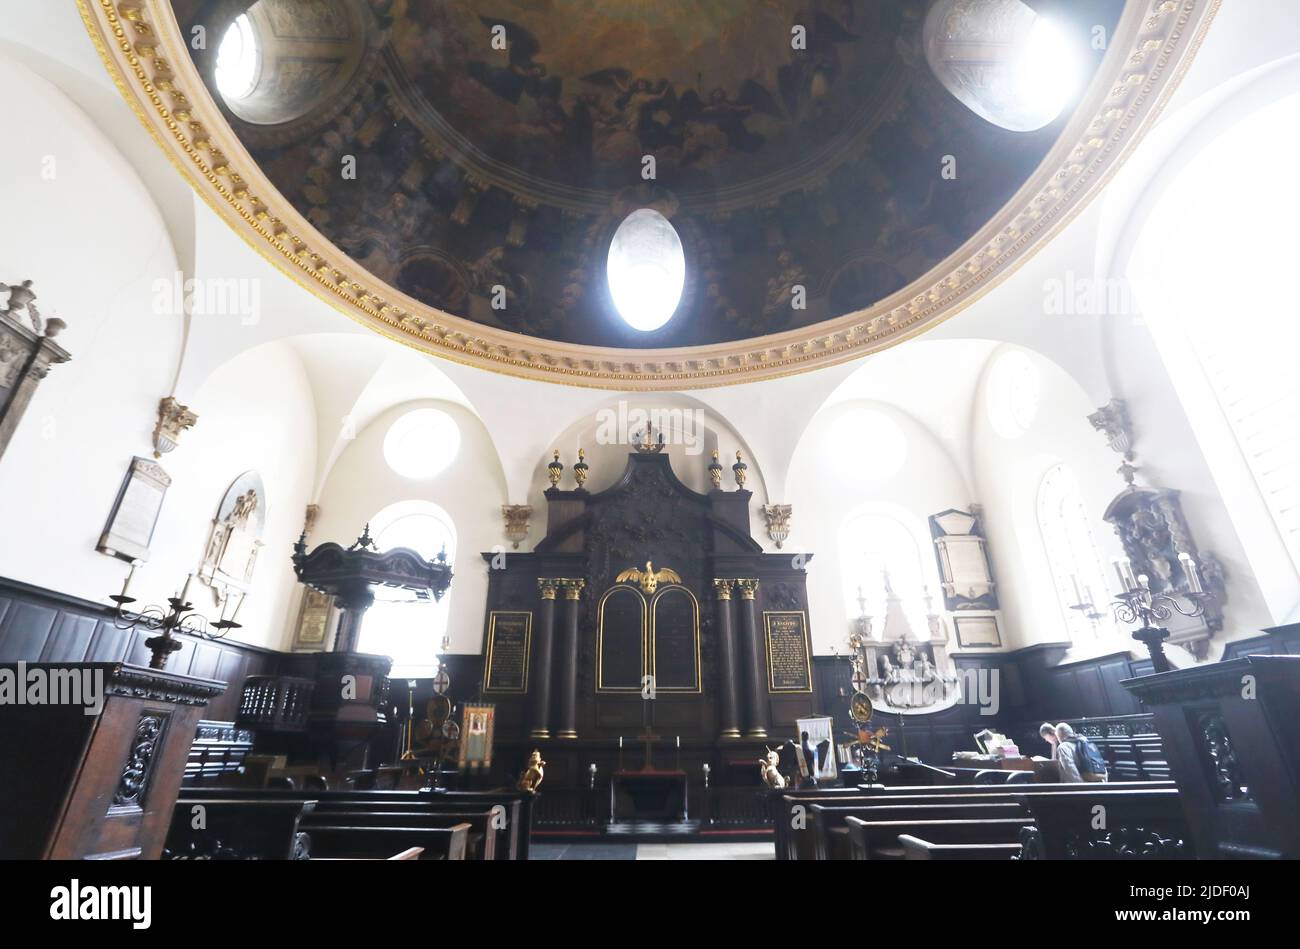 The interior of St Mary Abchurch, one of Sir Christopher Wren's finest parish churches, off Cannon Street in the City of London, UK Stock Photo